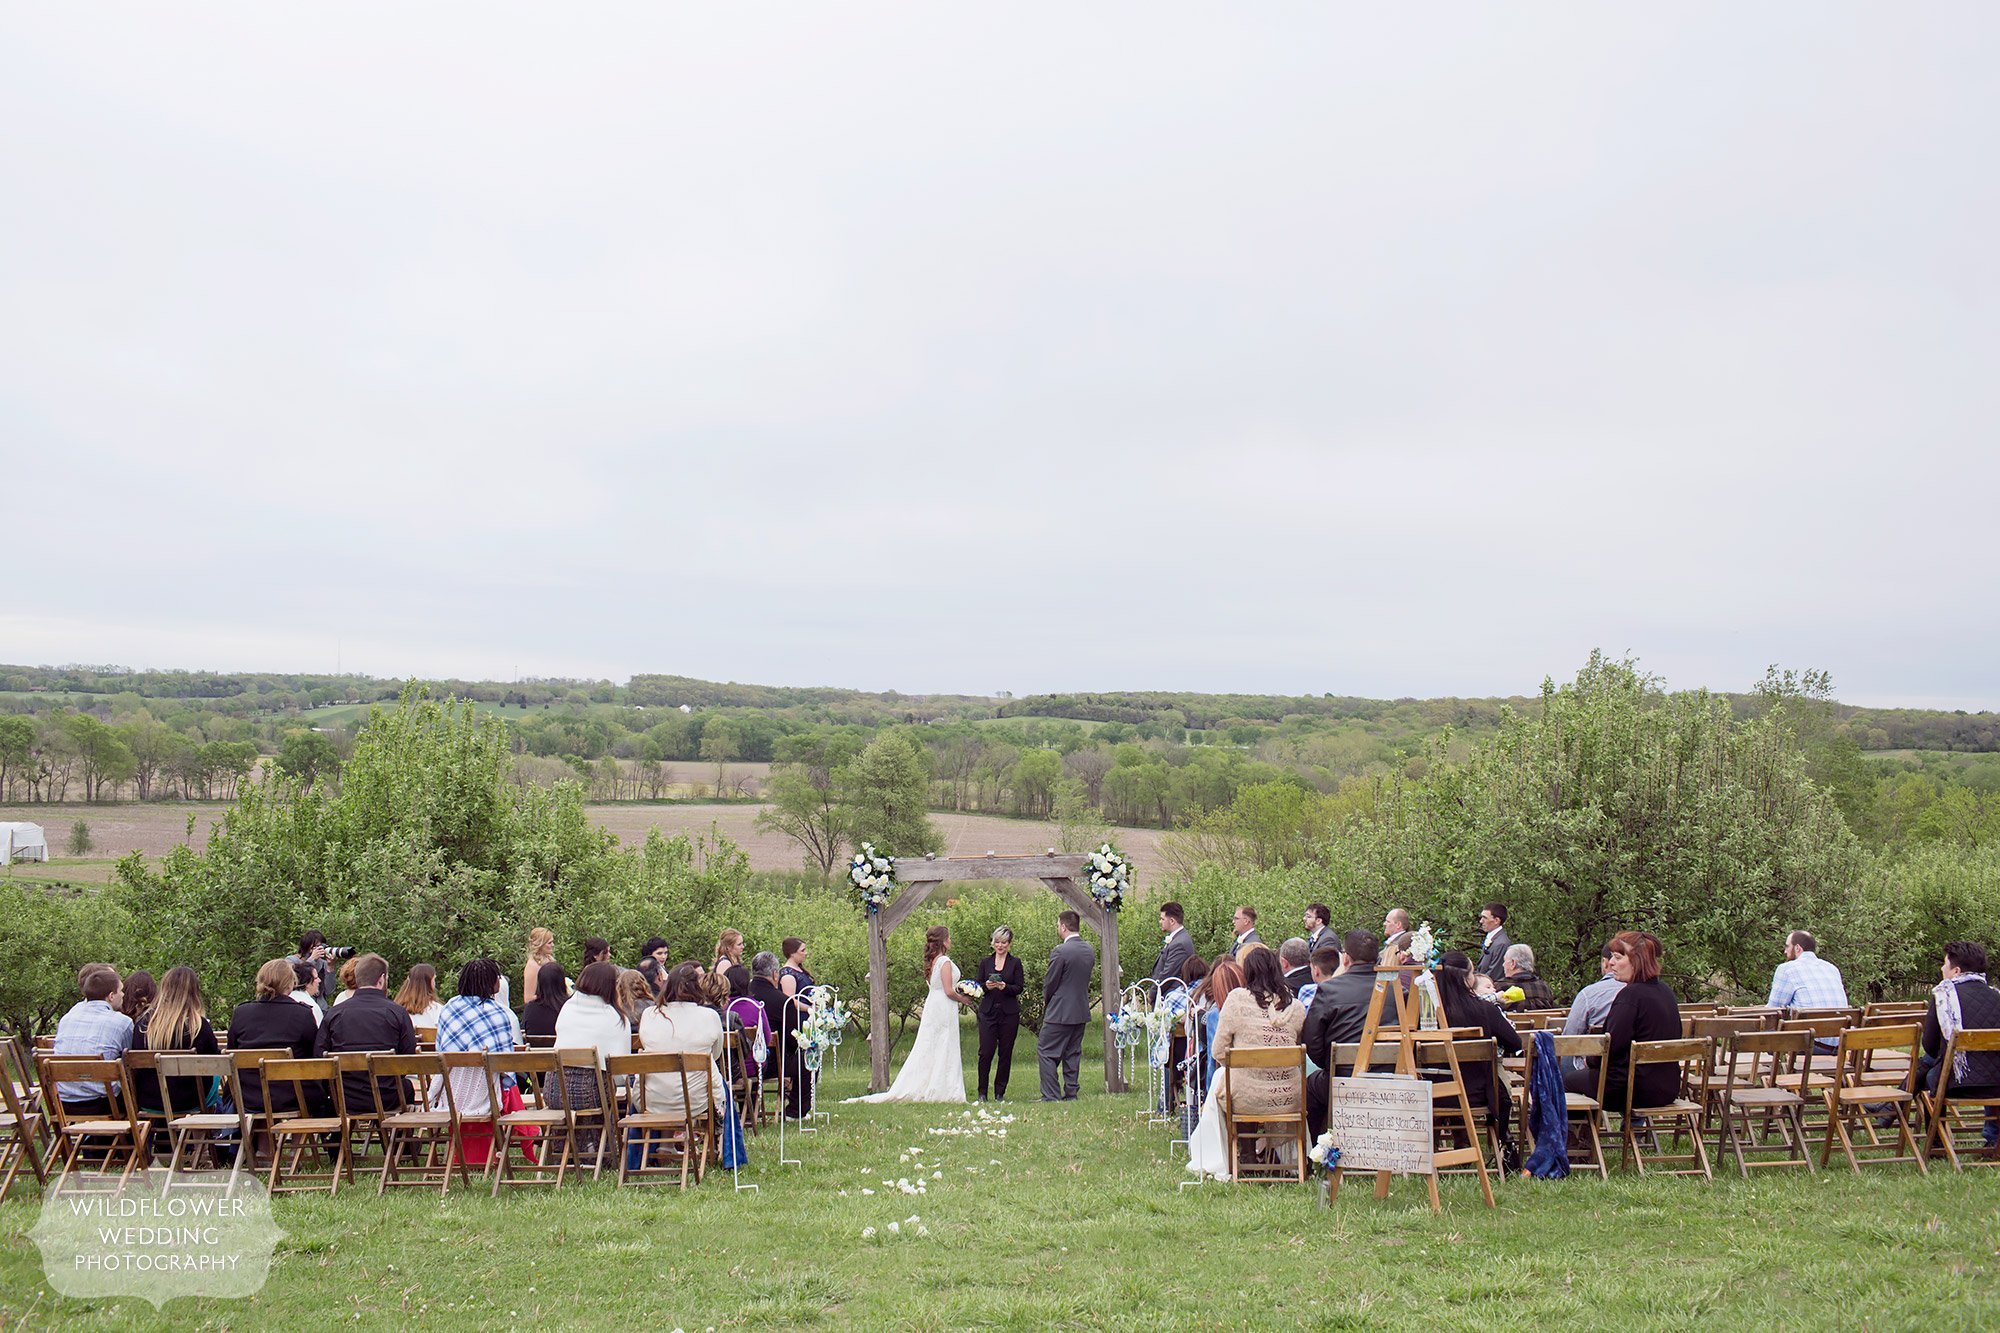 Scenic view of the outdoor ceremony space at this country wedding in Weston, MO.